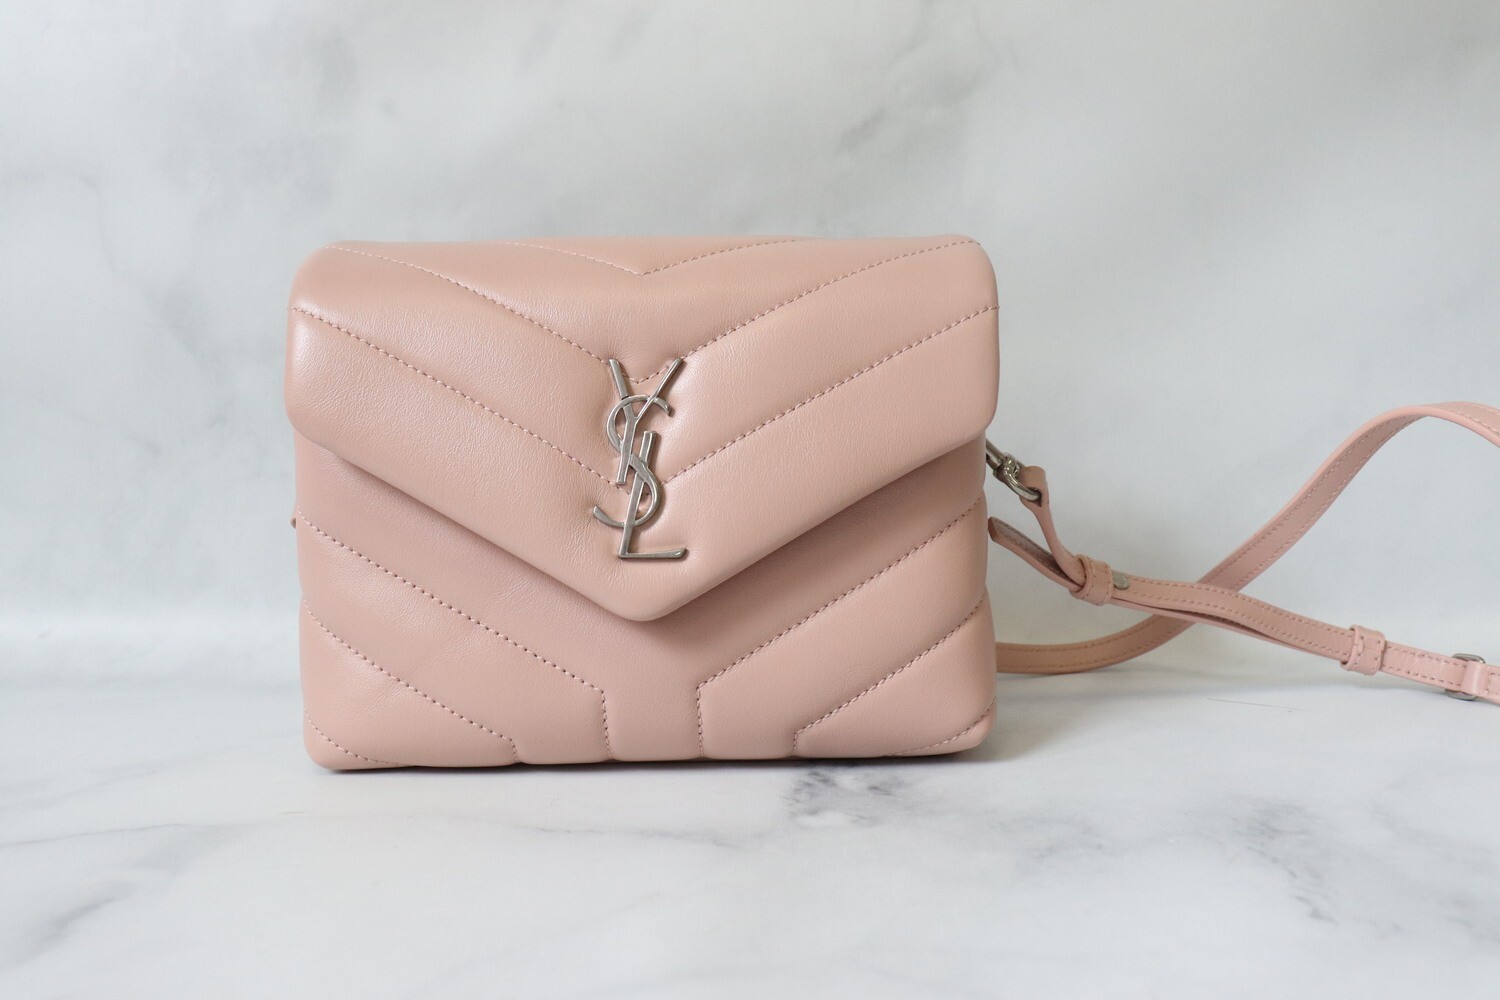 Saint Laurent Loulou Toy Bag in Pink